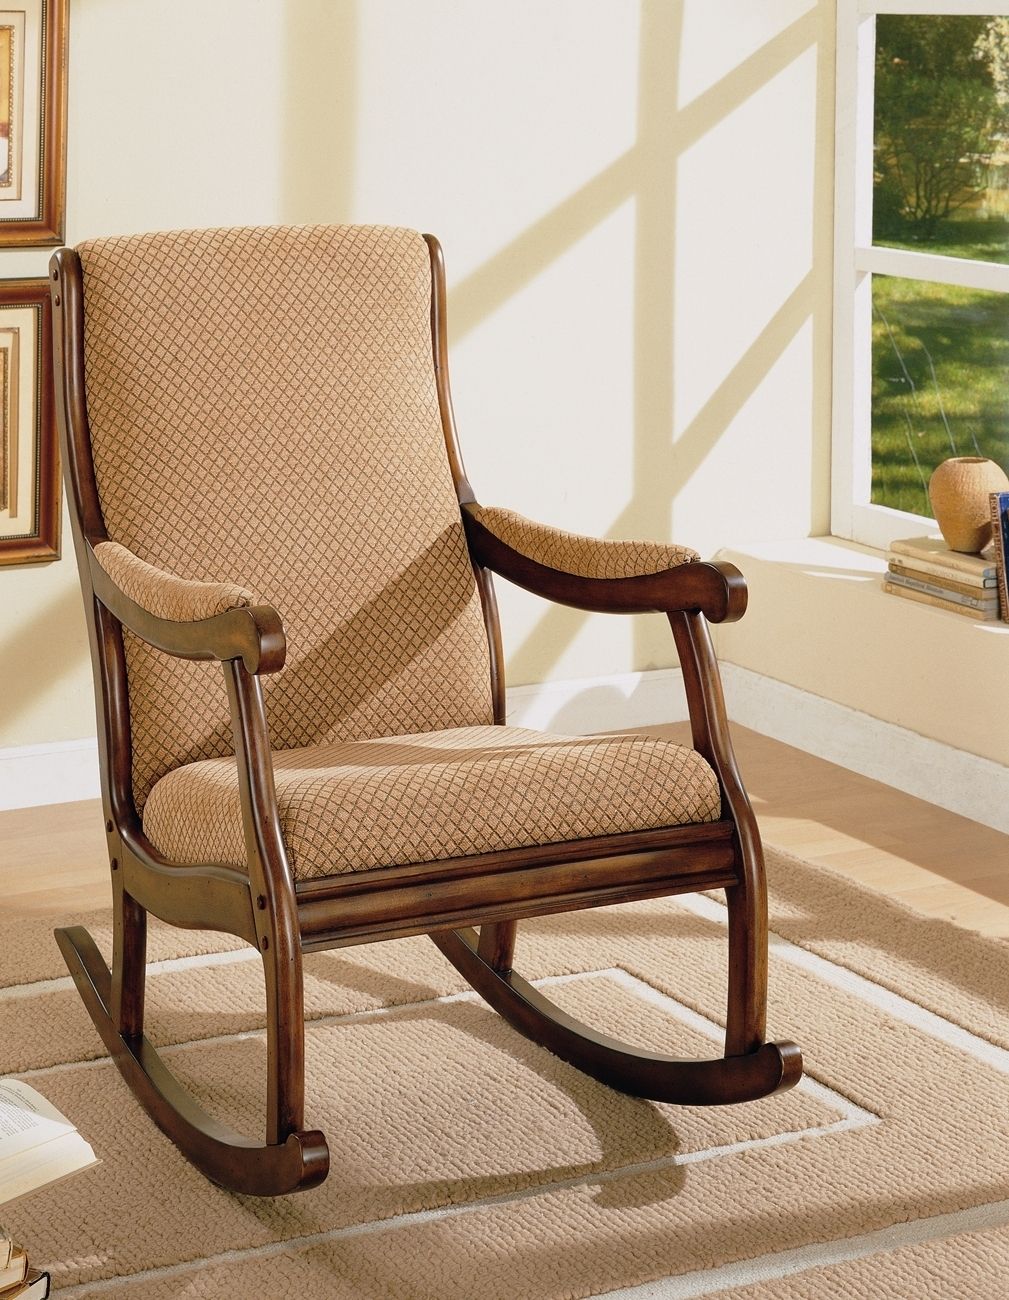 15 Collection of Rocking Chairs at Wayfair